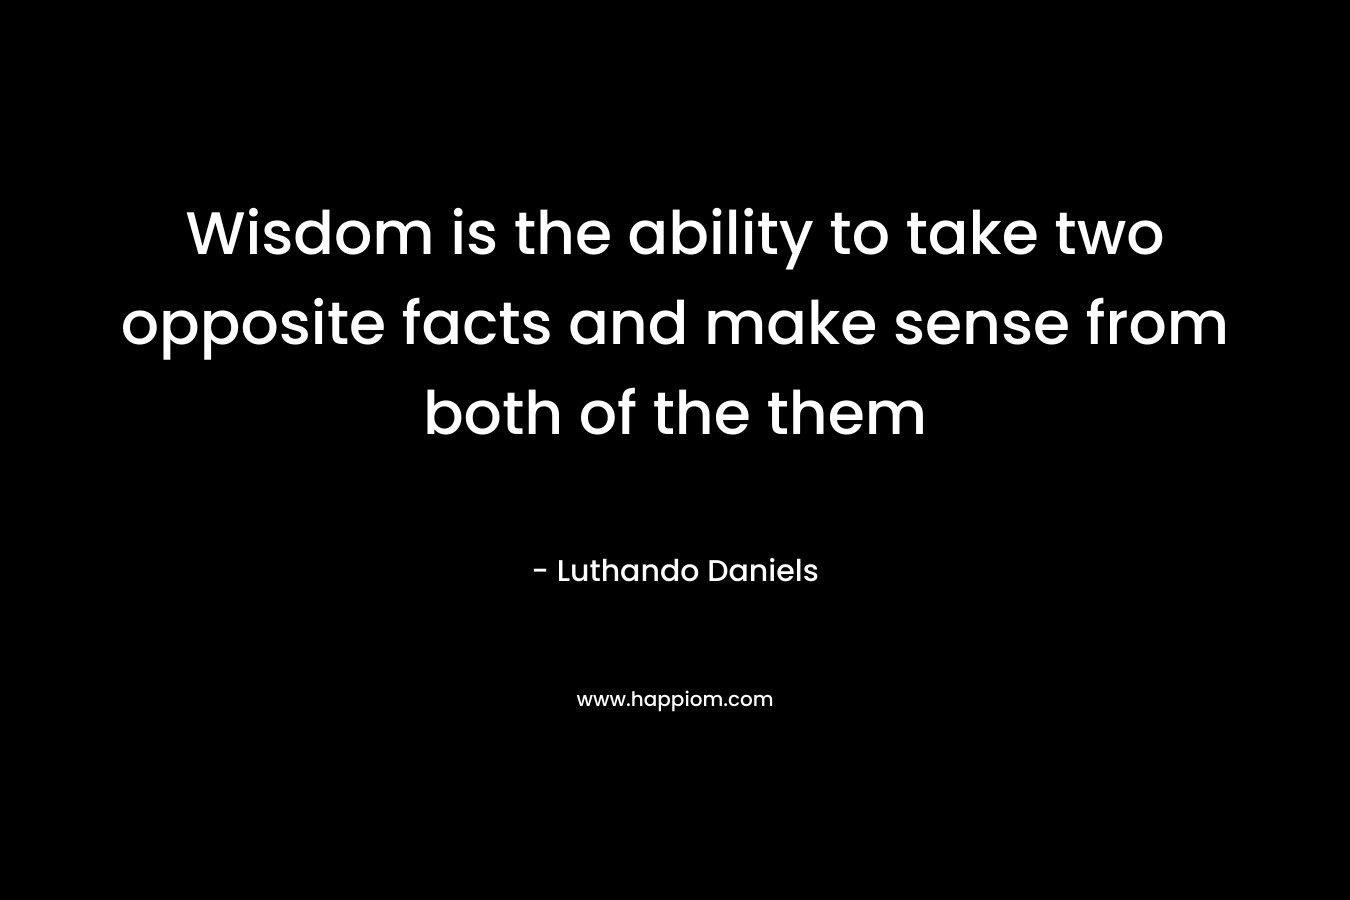 Wisdom is the ability to take two opposite facts and make sense from both of the them